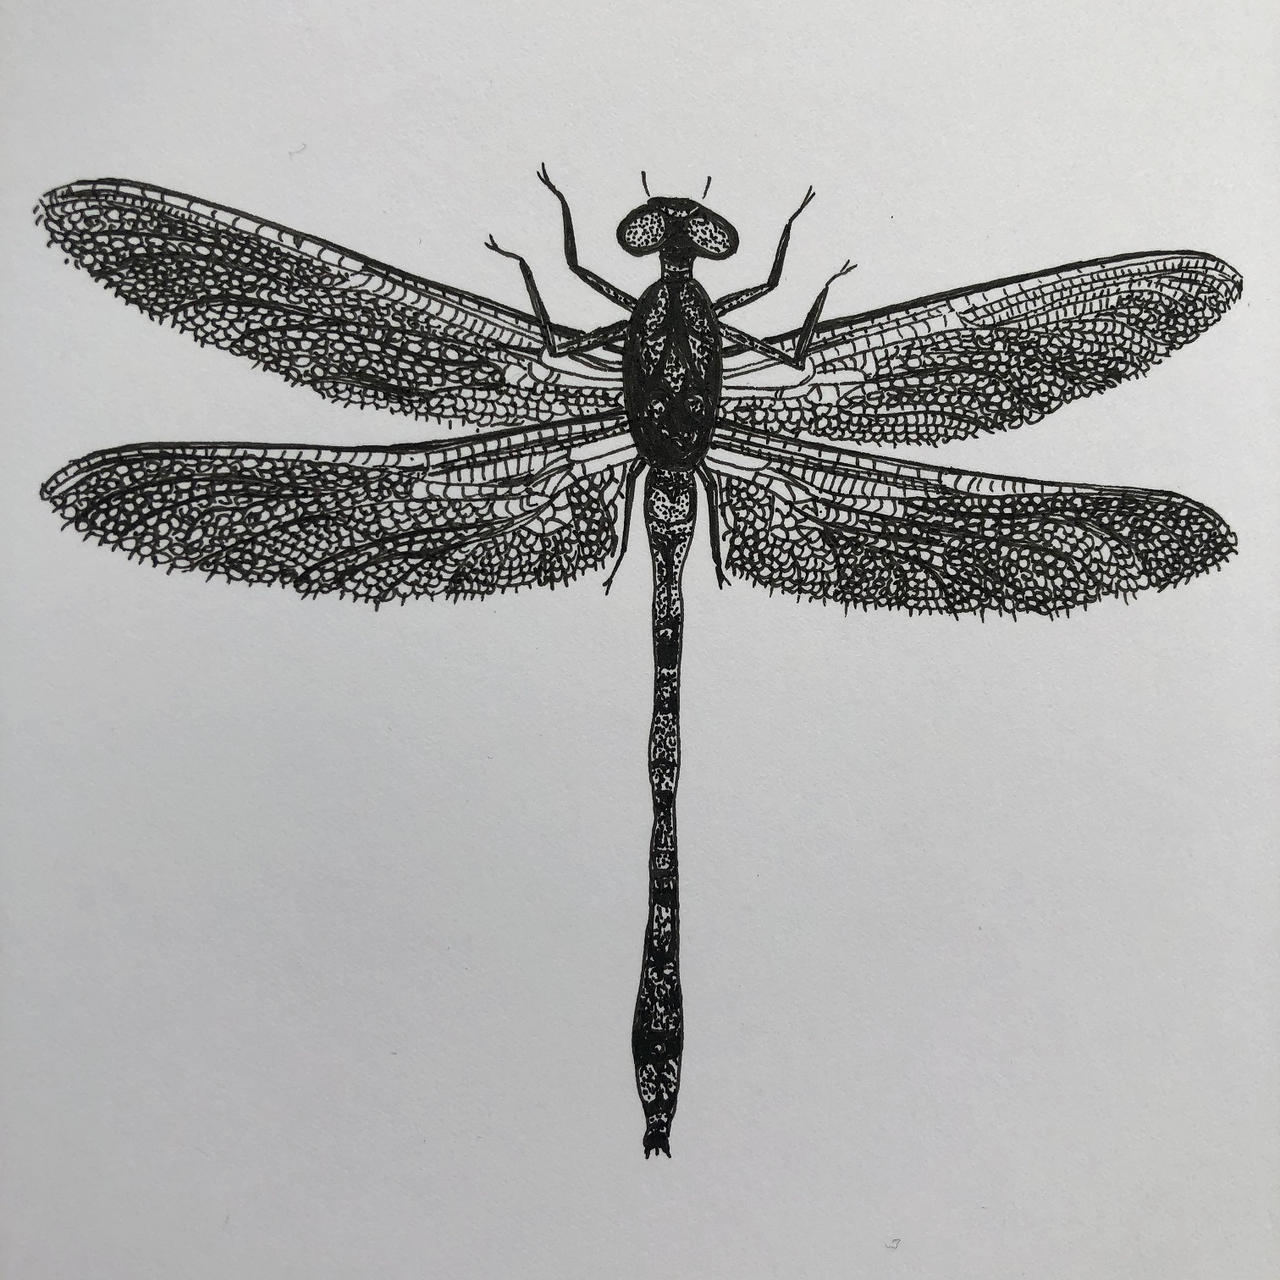 What's That Pen You Use for Drawing? – Dragonfly Spirit Studio